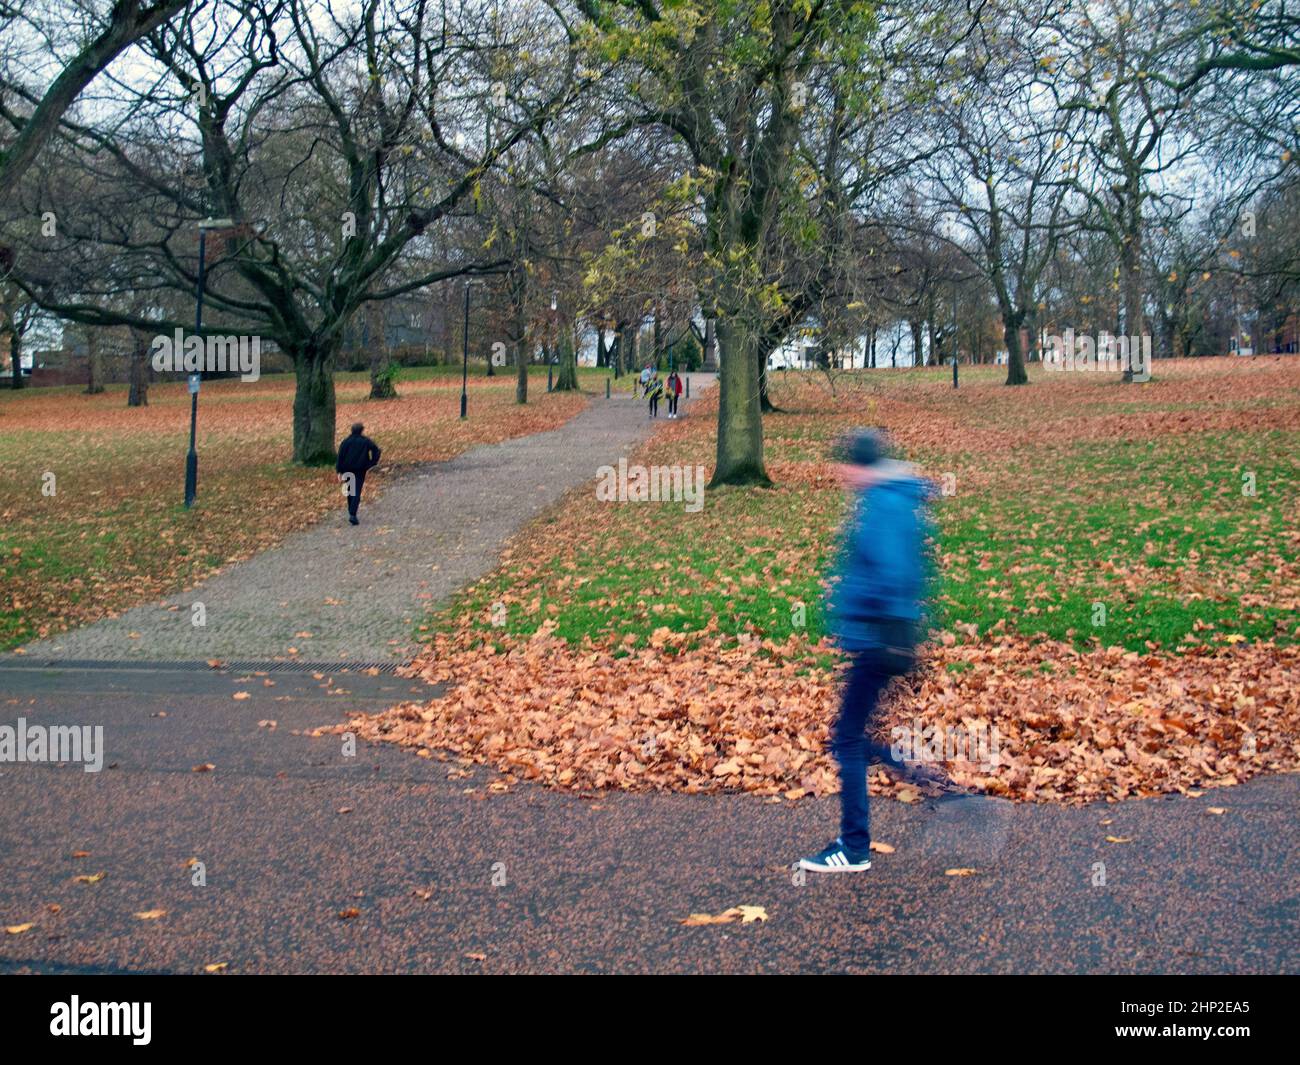 Man in blue jacket, jogging through wooded park. With trees and brown leaves fallen on the ground, with people walking. Stock Photo